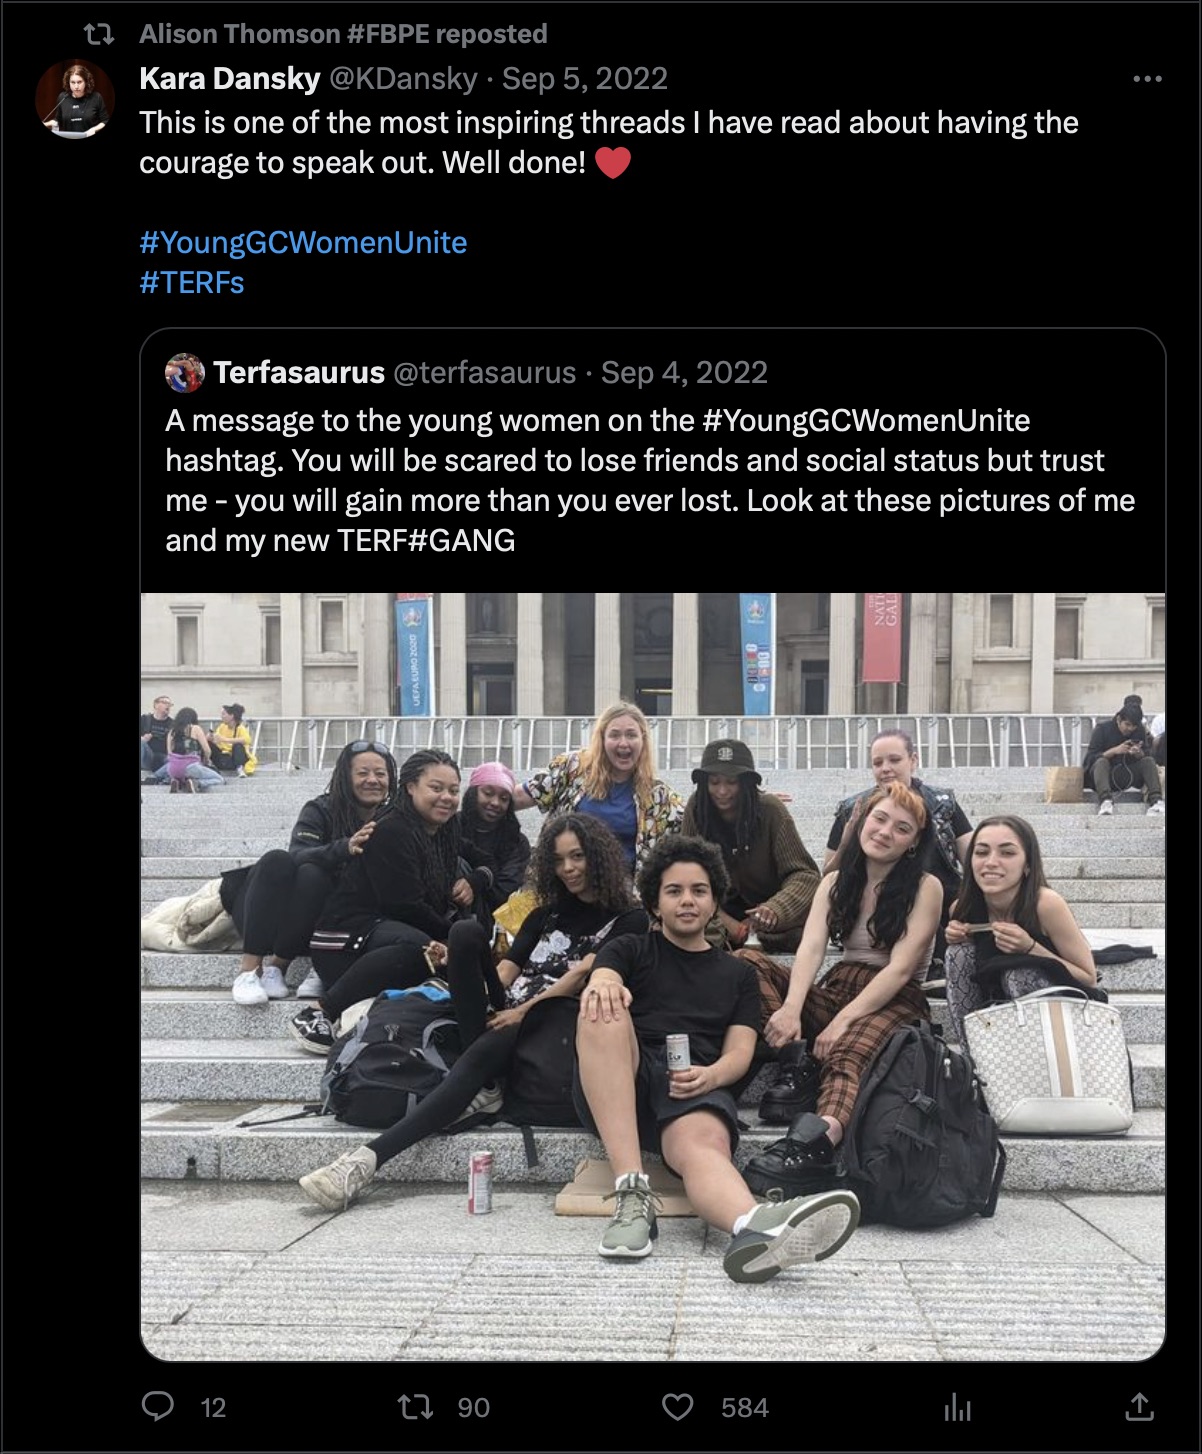 Screenshot of a tweet retweeted by Cllr Alison Thomson which promotes a thread of young so-called 'Gender Critical' women and uses the hashtags '#YoungGCWomenUnite' and '#TERFS'